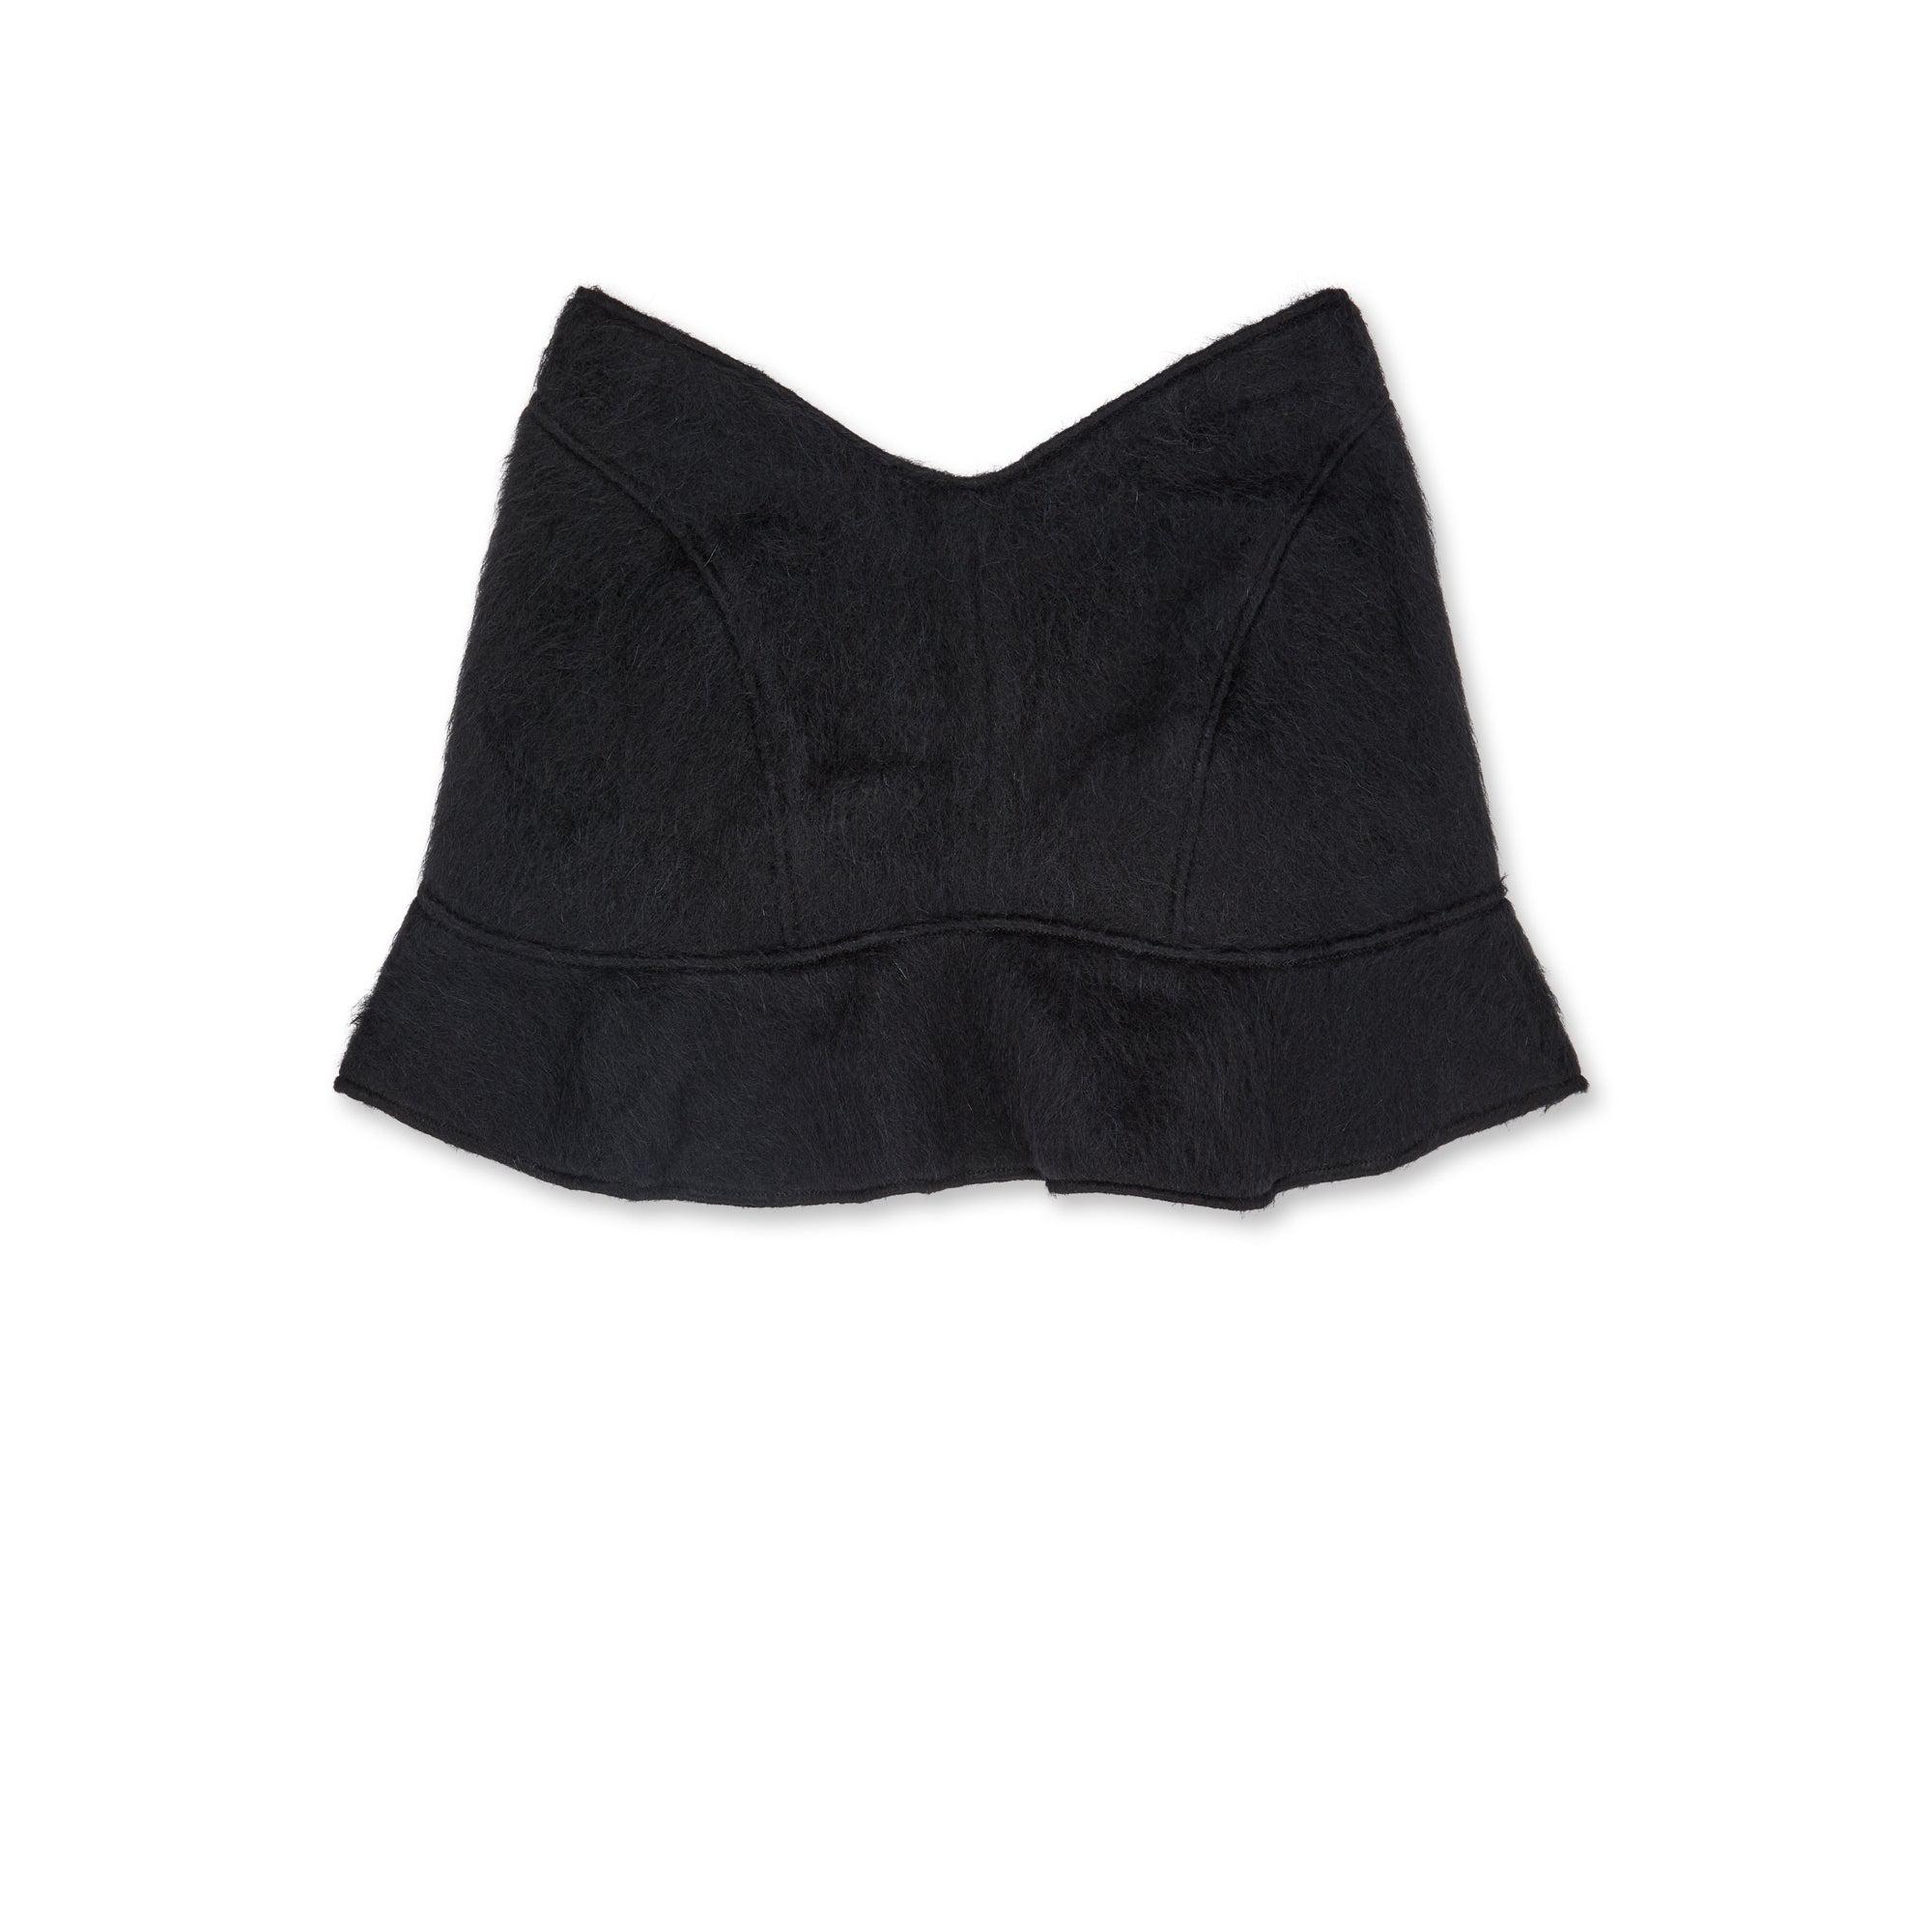 KNWLS Women's Claw Skirt (Black) by CHARLOTTE KNOWLES